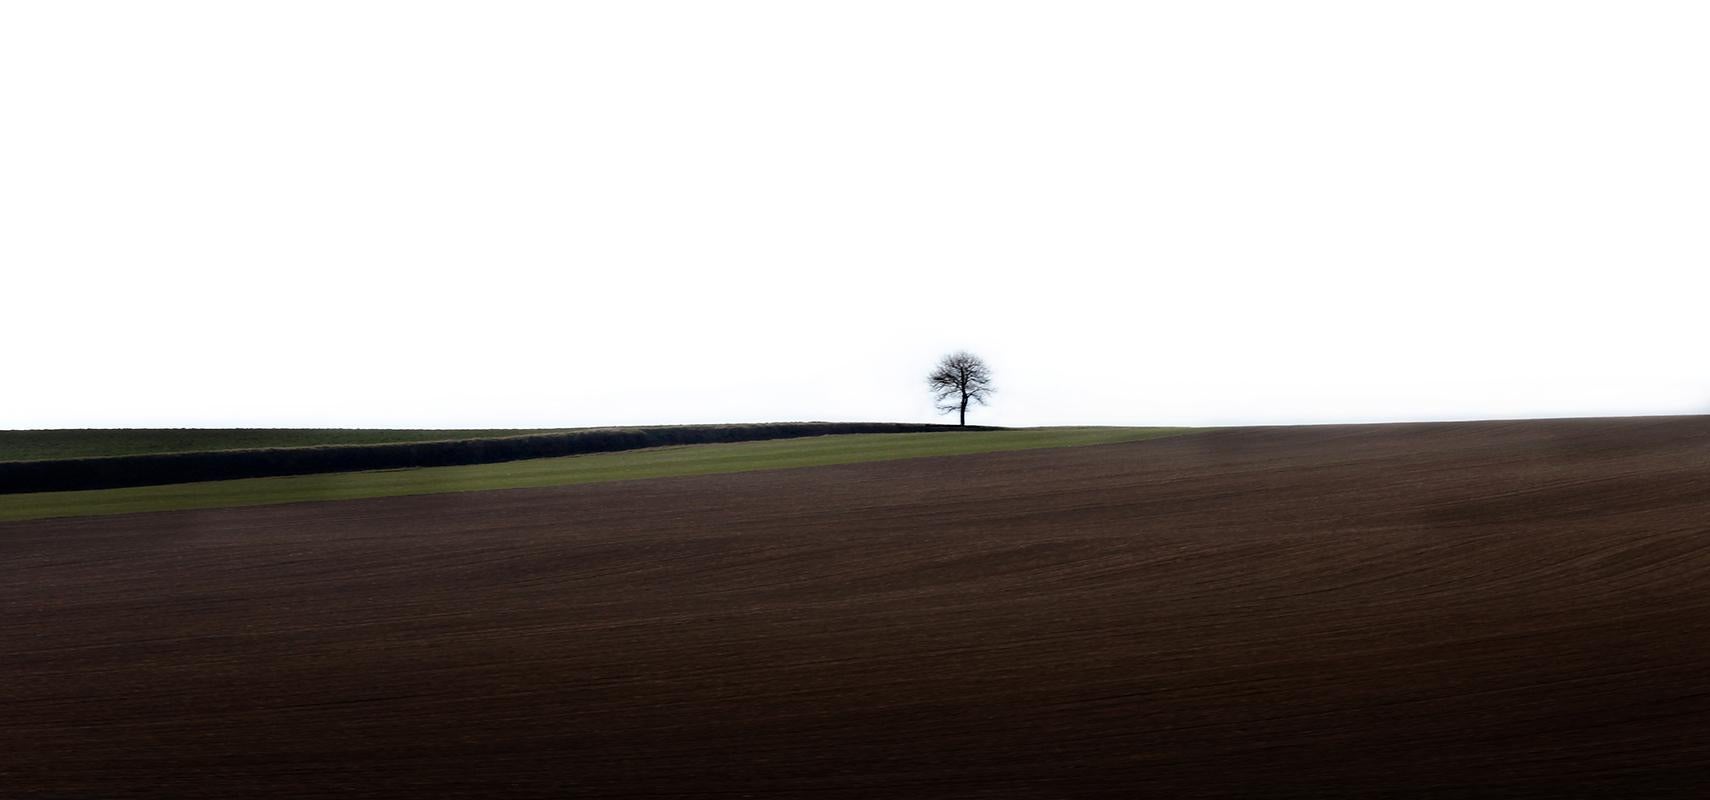 Loneliness- Signed limited edition nature print, Tree, Field, Green panorama